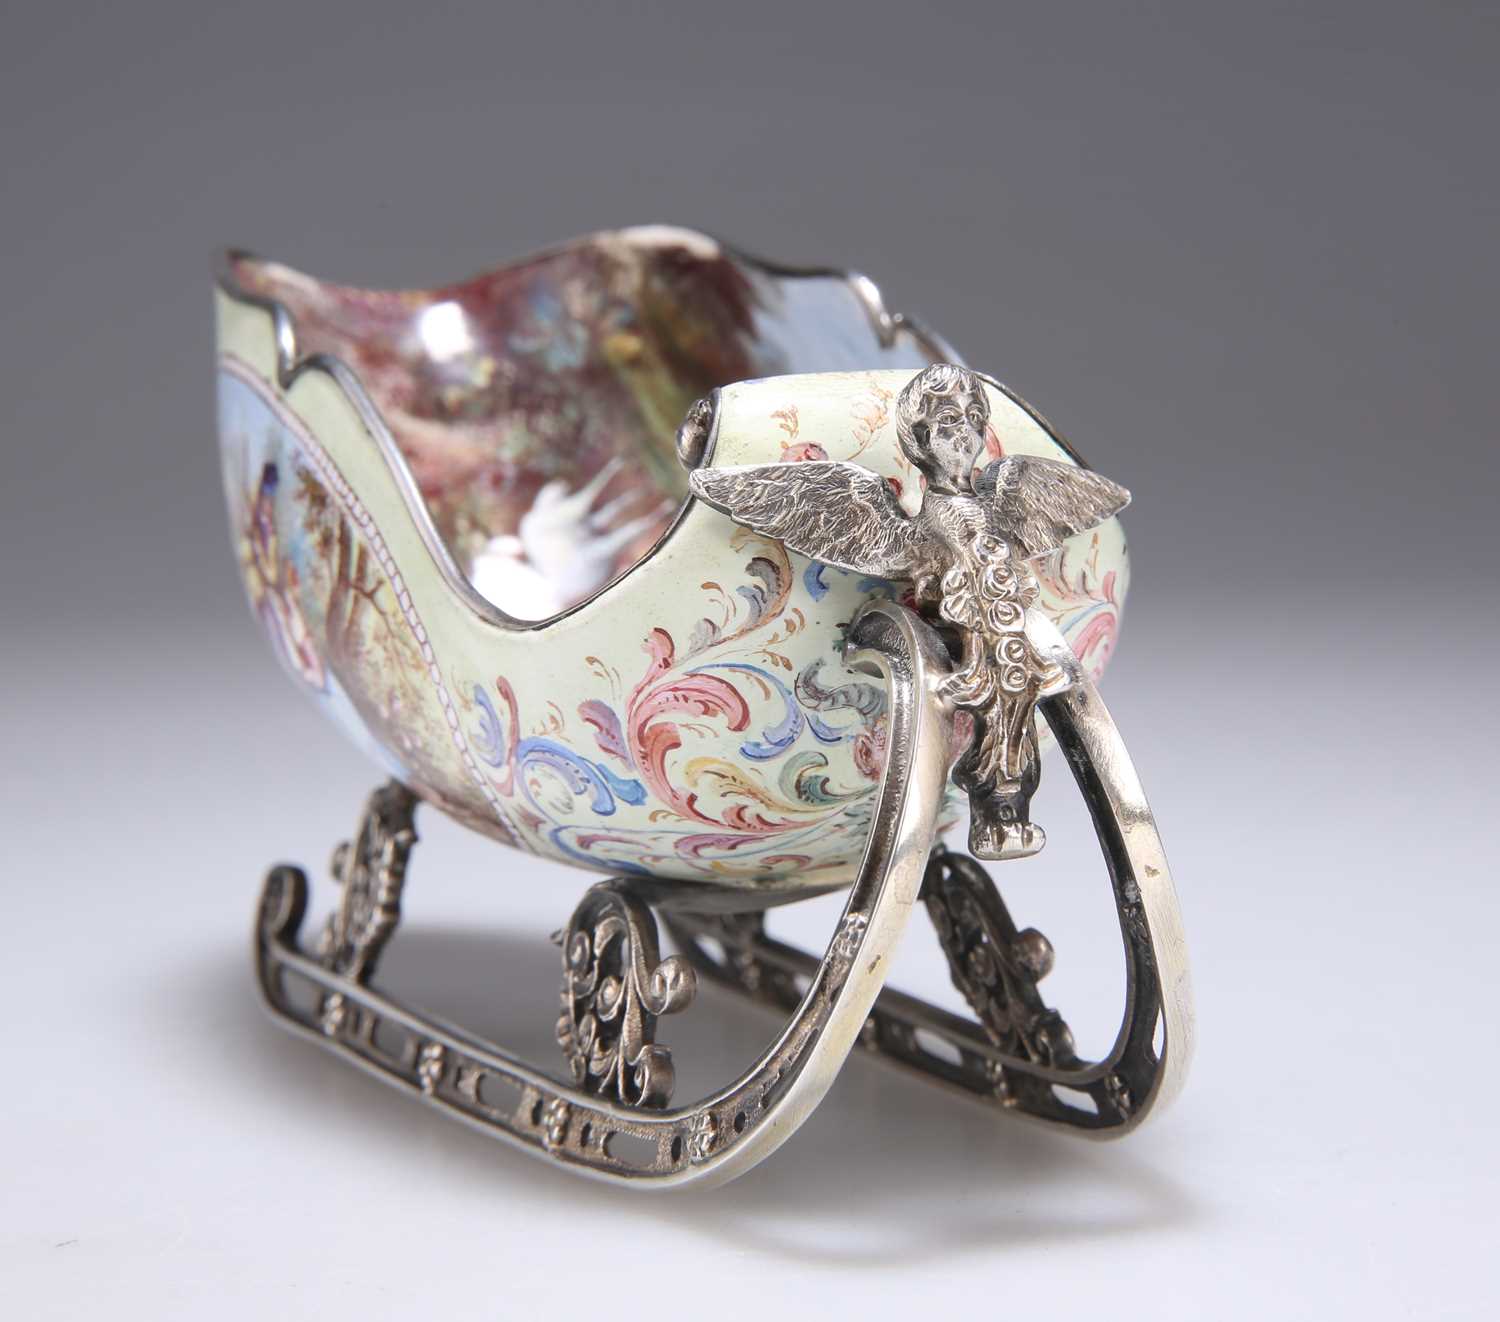 A VIENNESE ENAMEL AND SILVER MINIATURE SLEIGH - Image 5 of 5